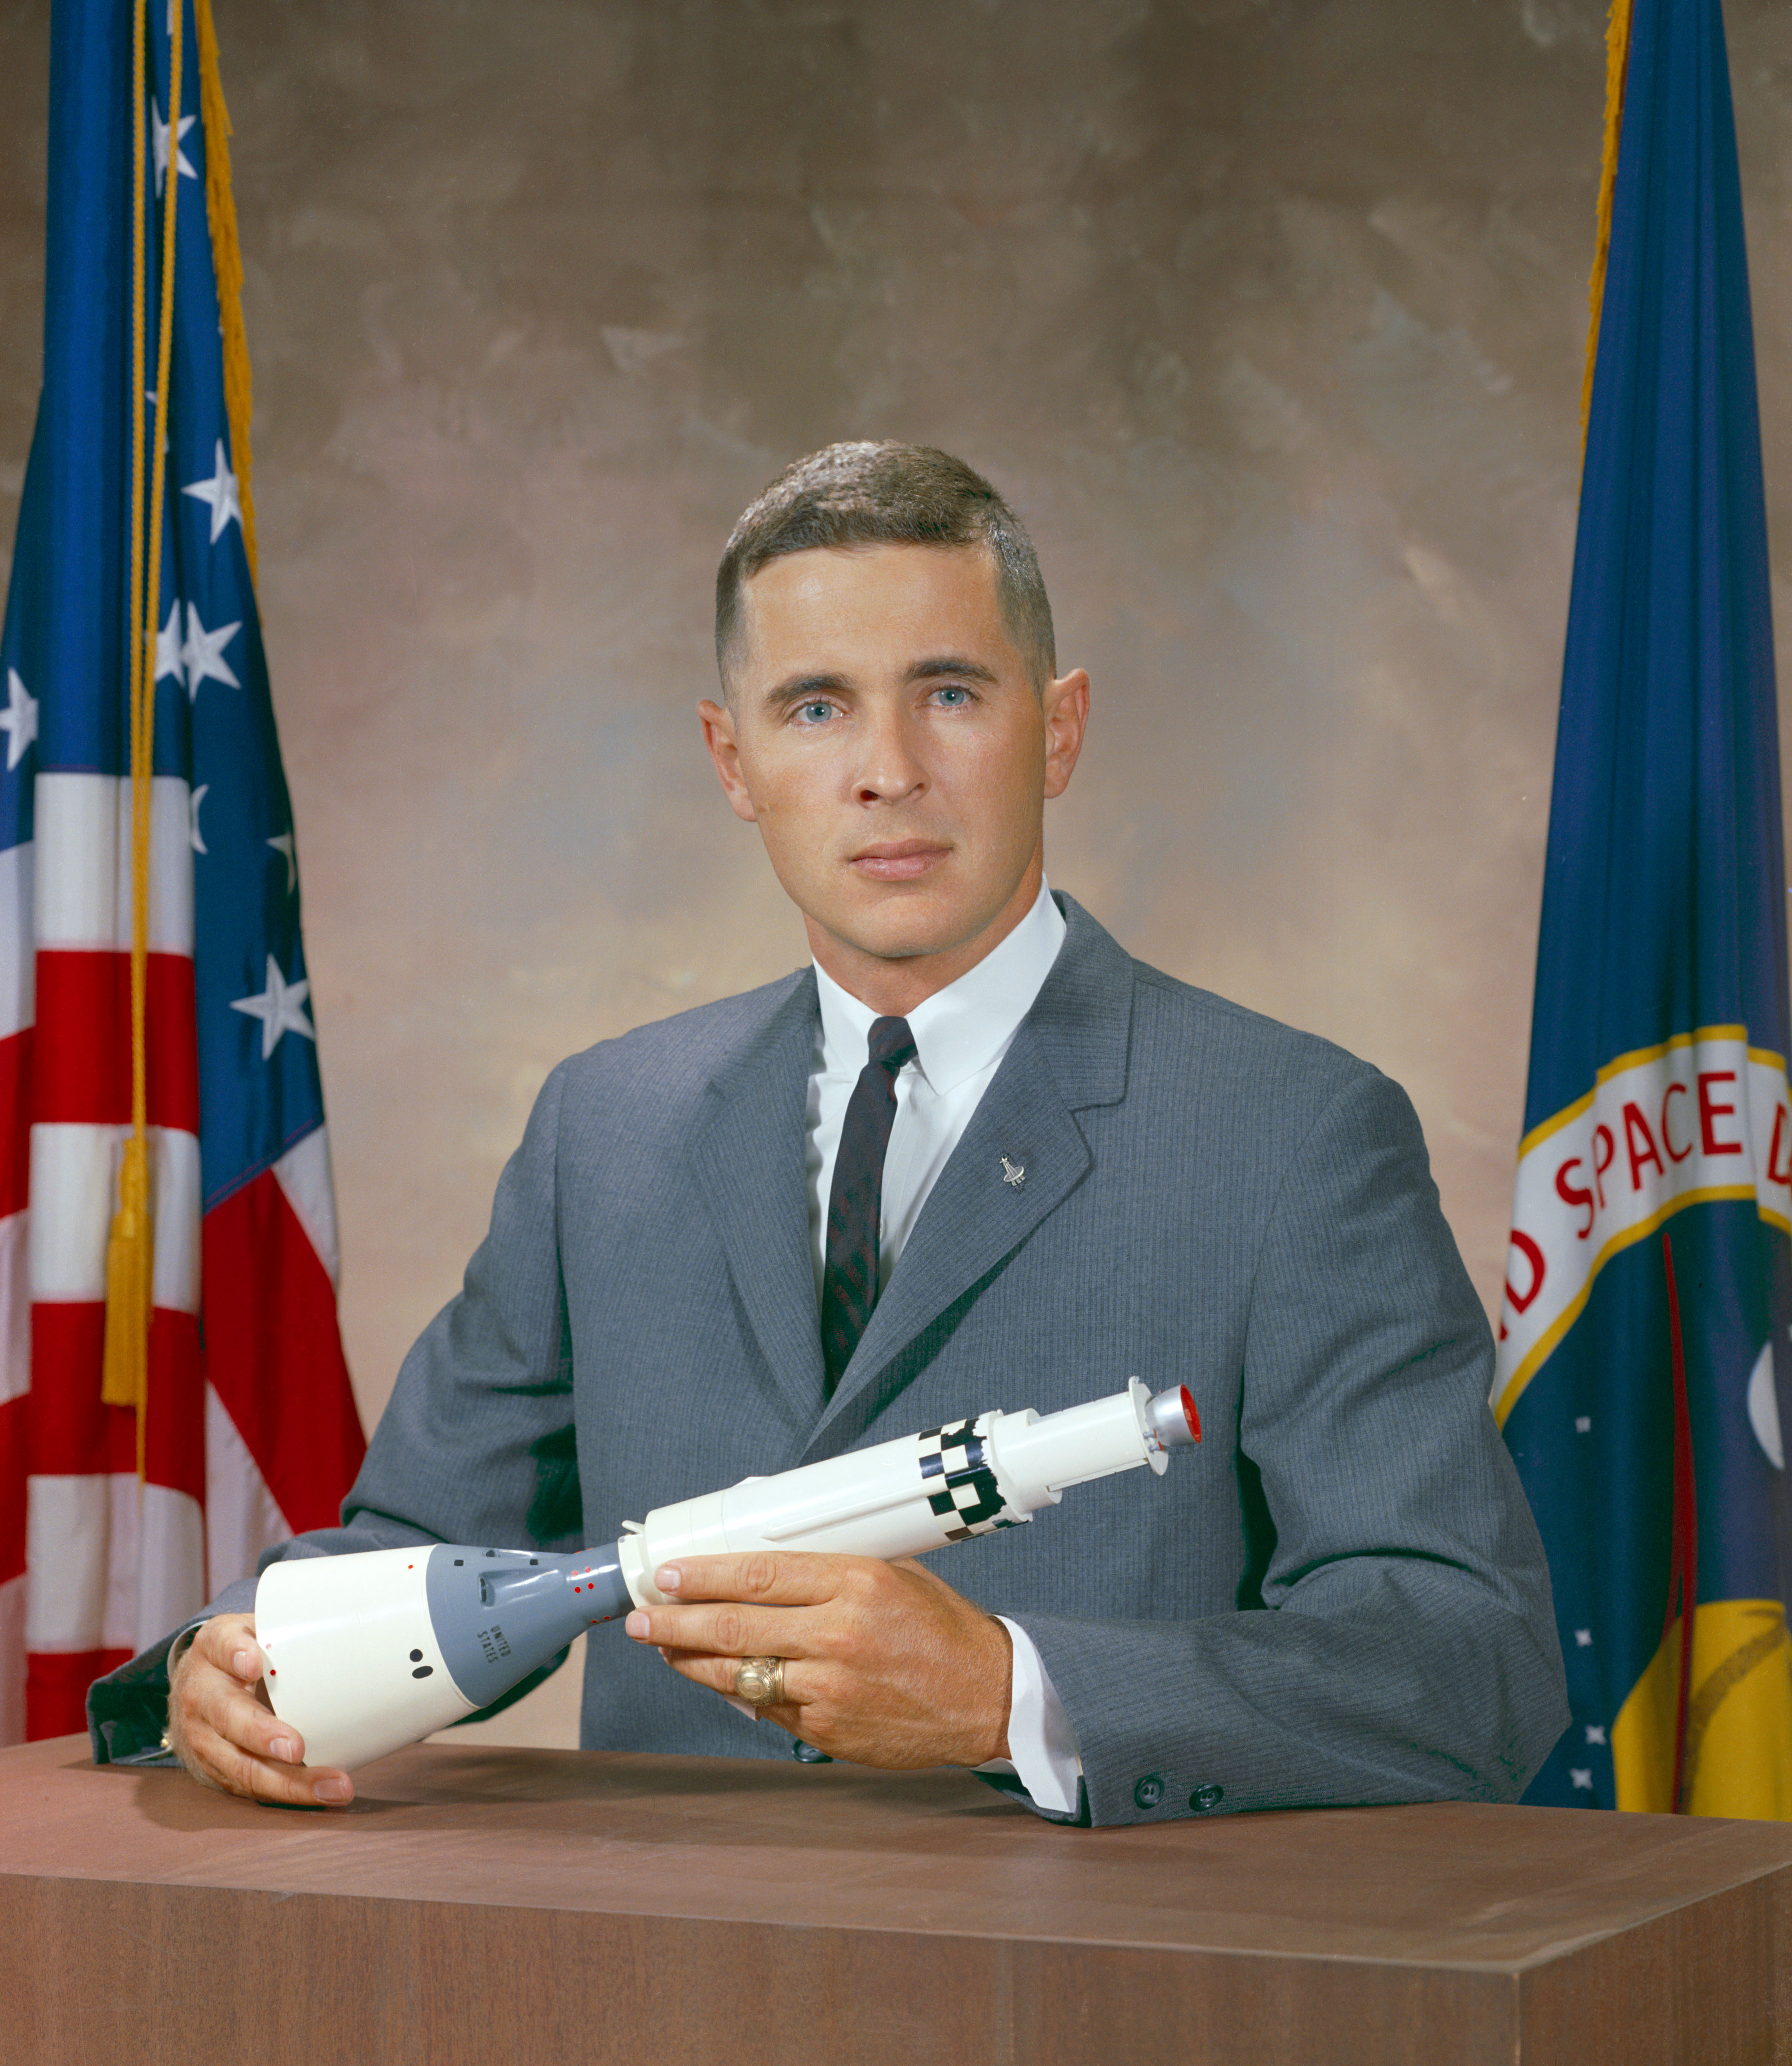 Astronaut William A. Anders